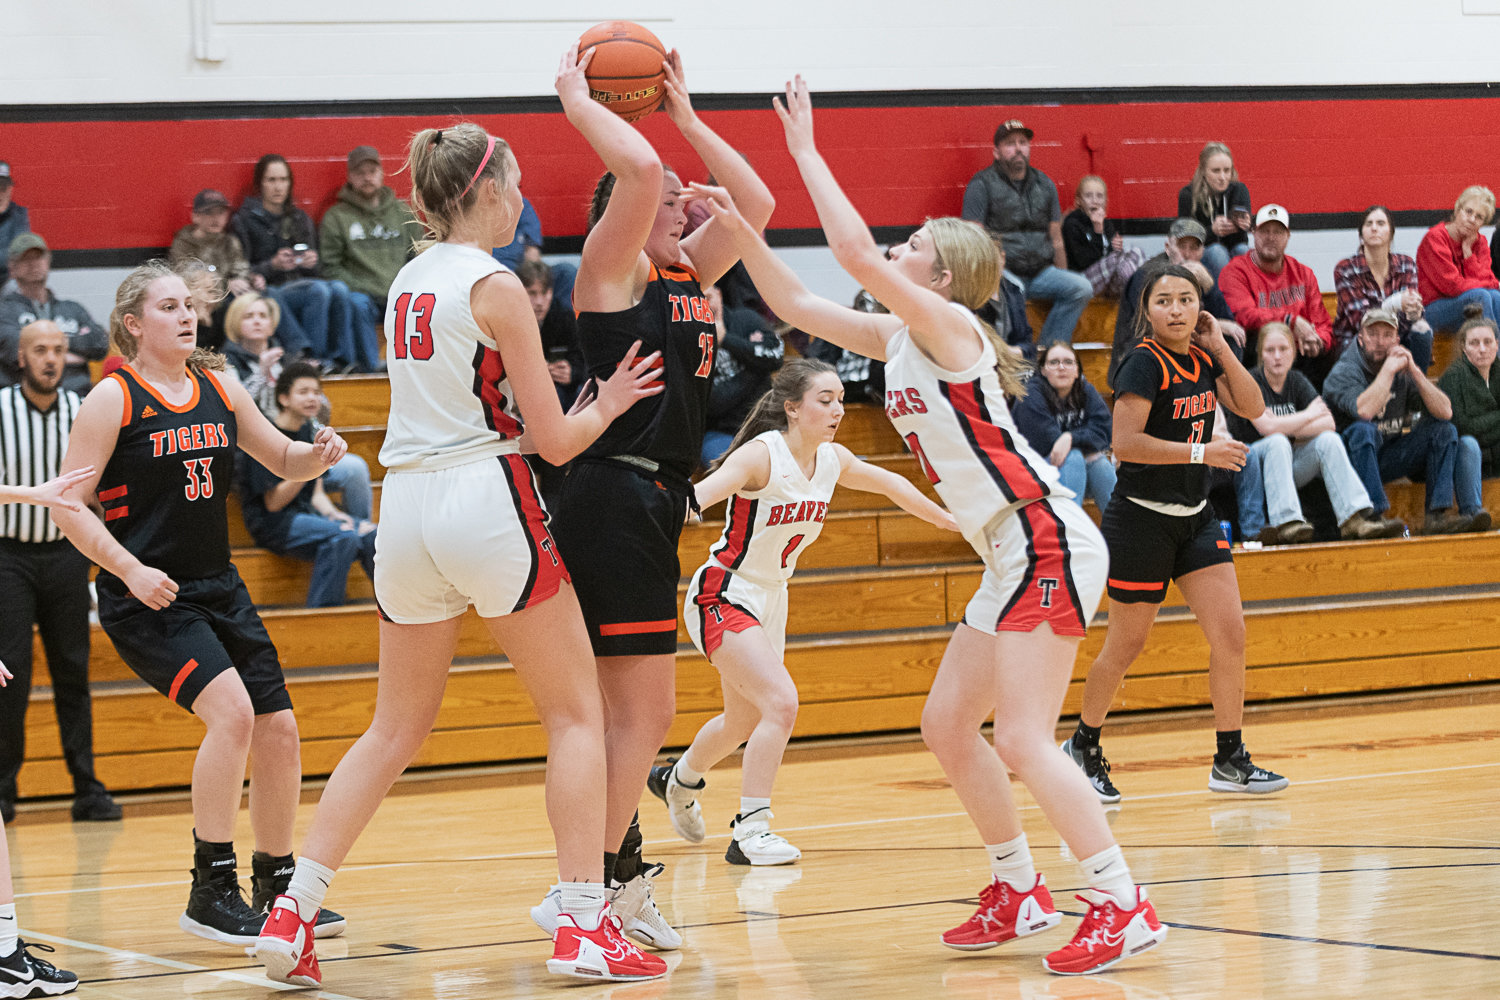 Gracee Cline passes the ball out of the post during the second half of Centralia's 56-16 win over Tenino on Dec. 1.